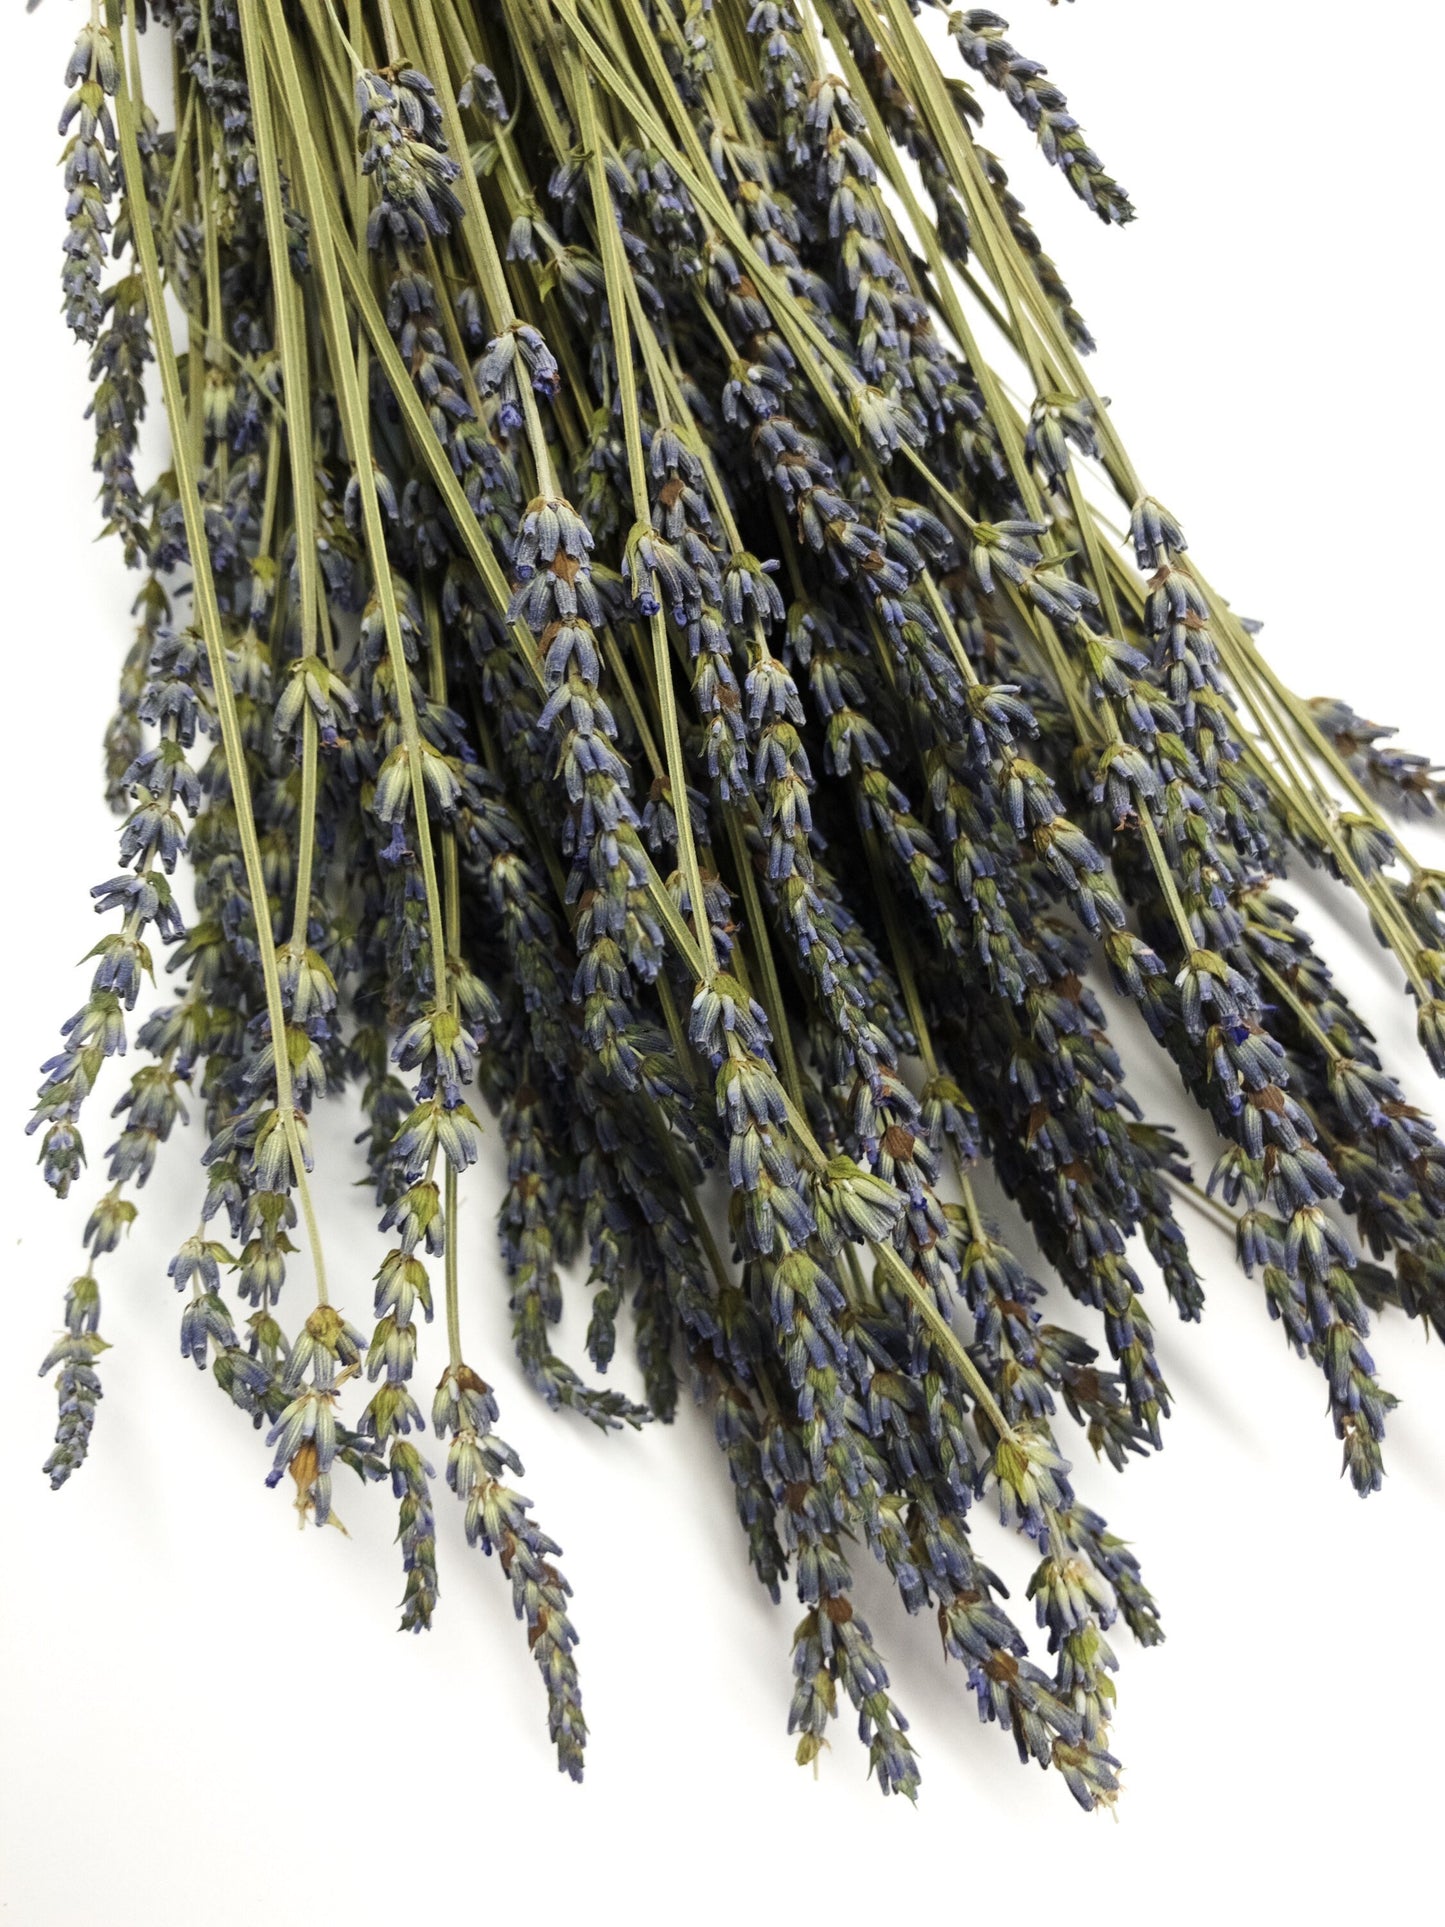 French Lavender, Preserved Flowers, Dried Flower, Lavender, Long Stems, Dried Lavender, Bundles, Wedding, Home Decor, Floral, Flowers